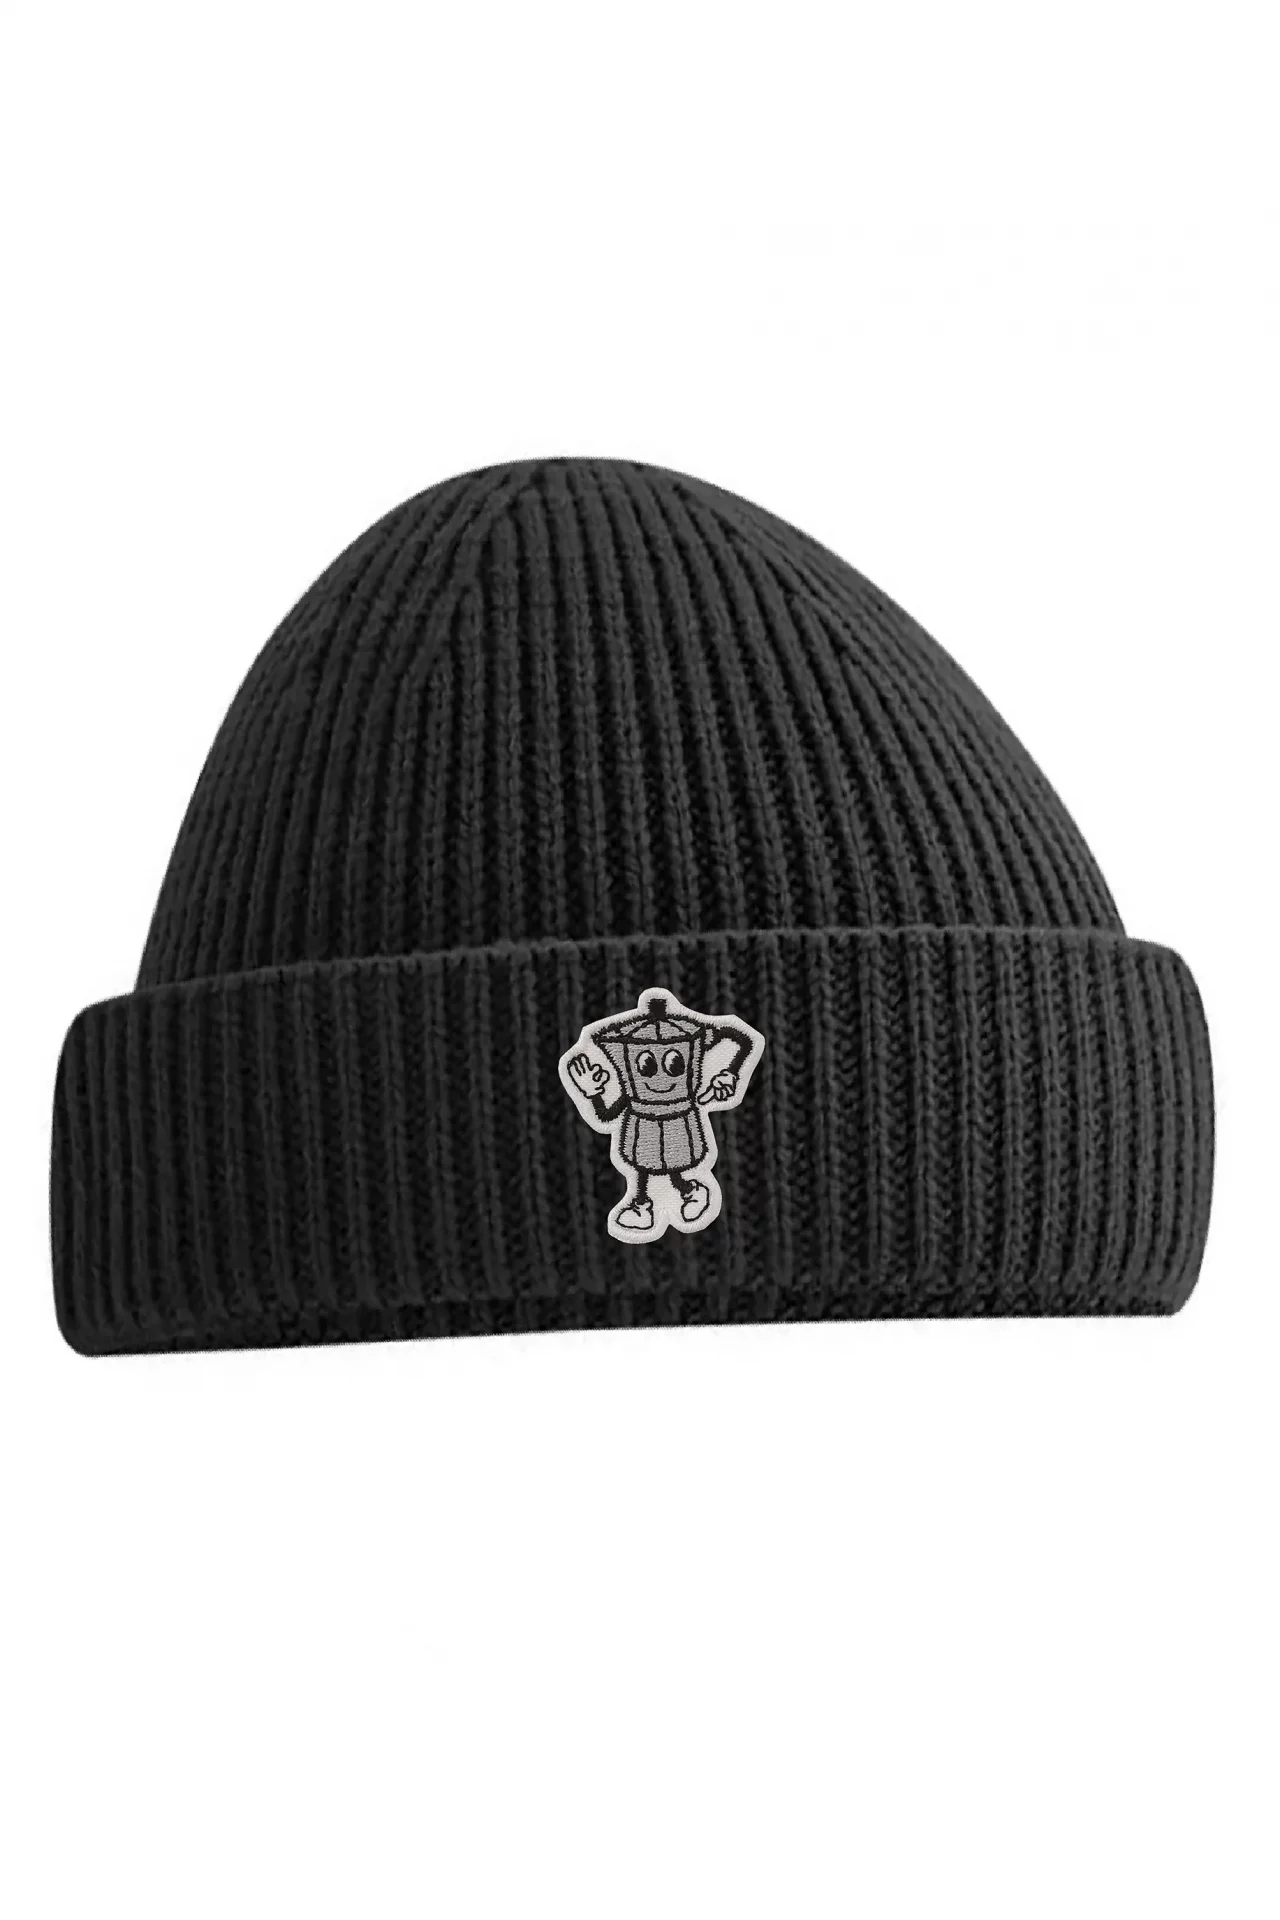 Black beanie with a coffee maker illustration embroided